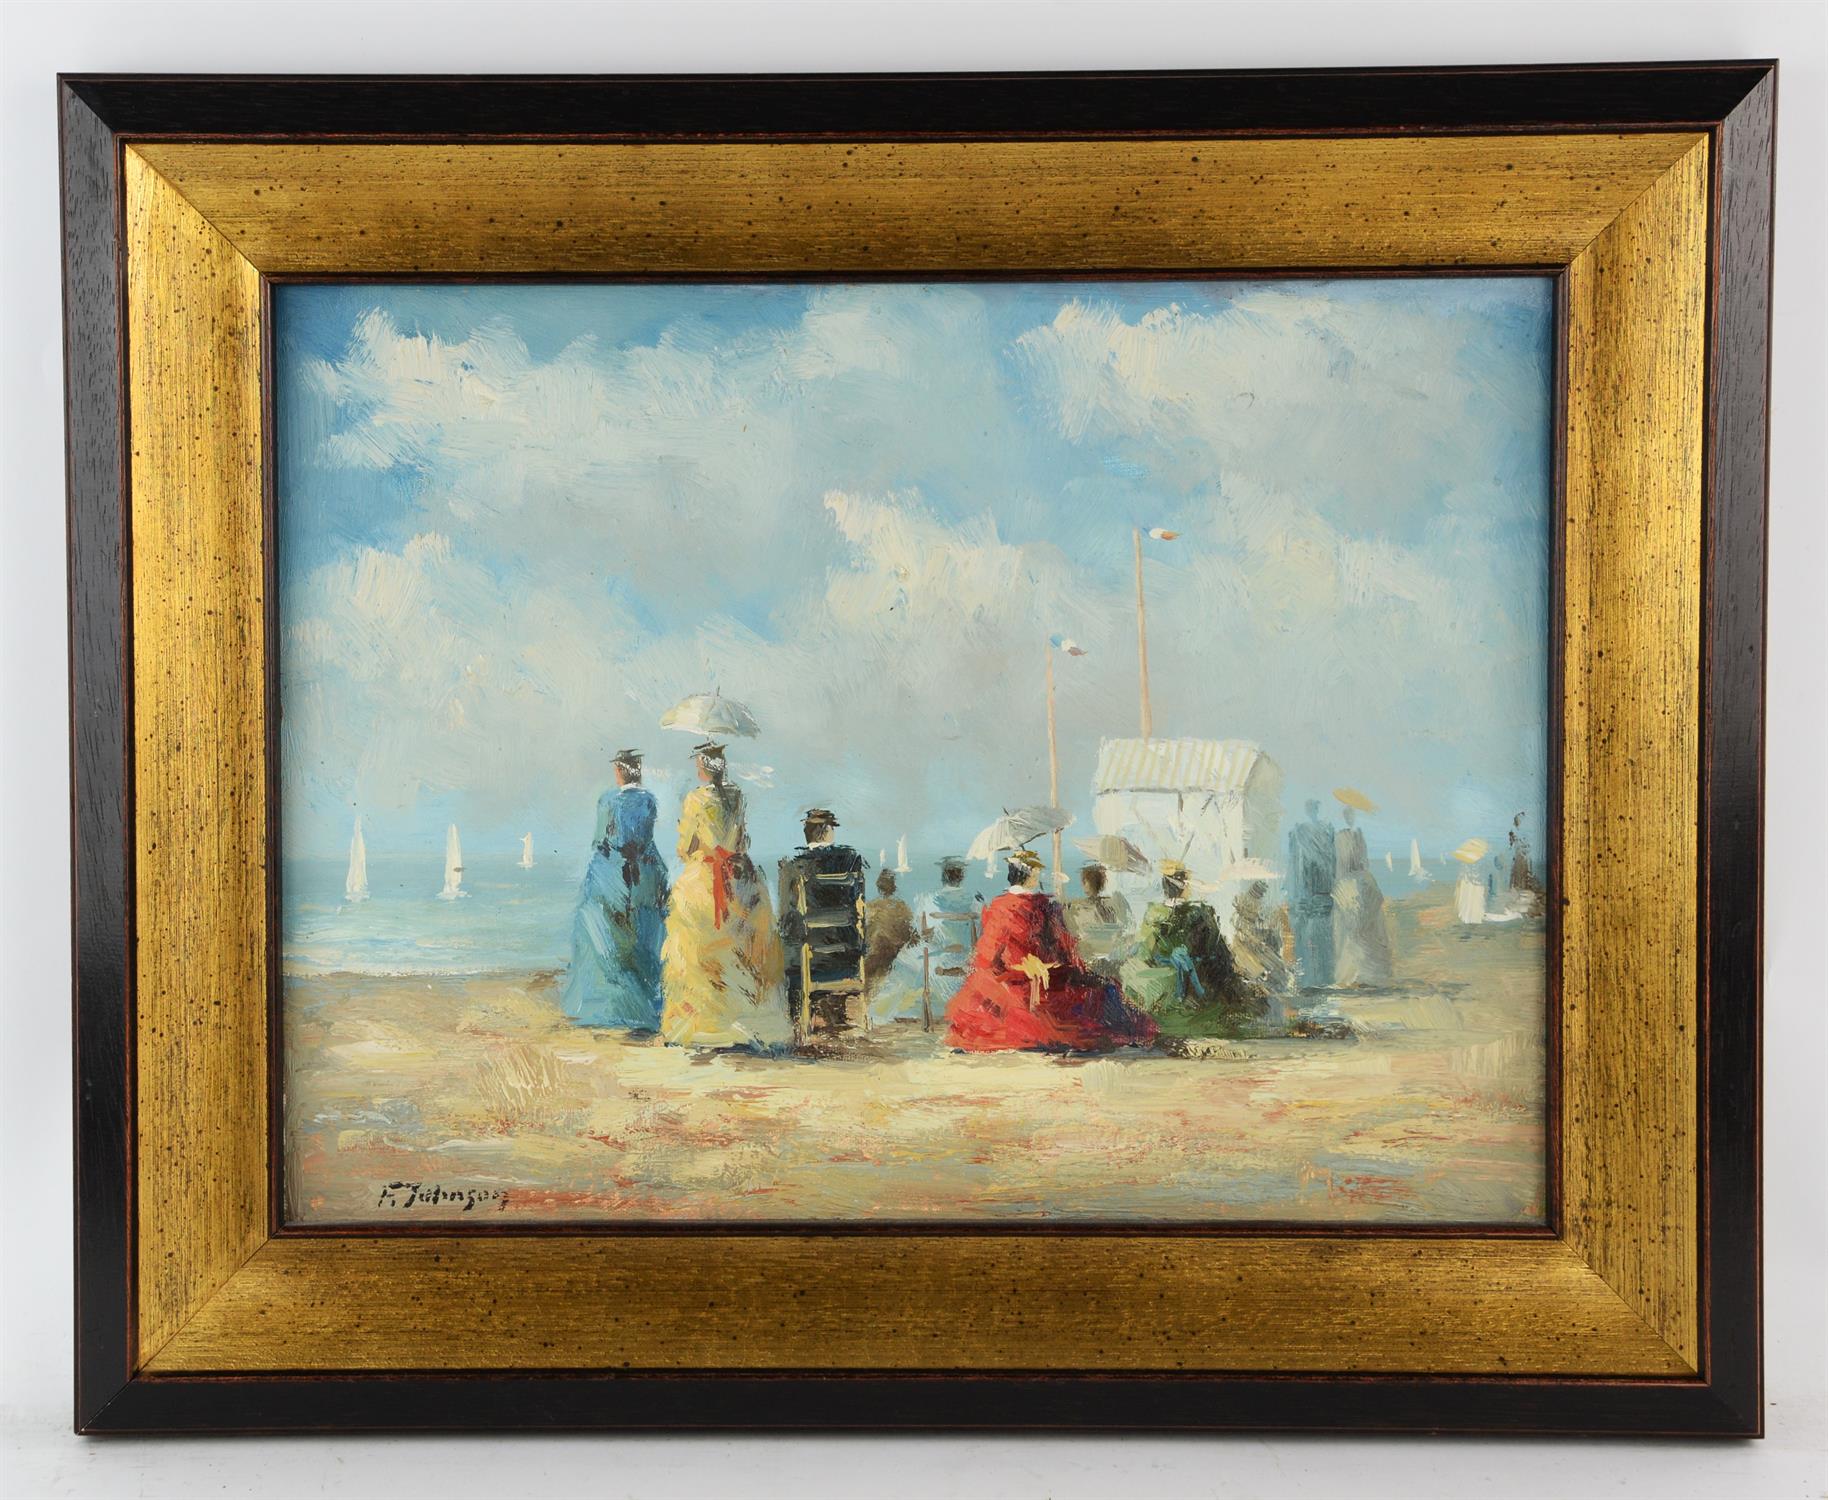 F. Johnson (20th century) in the manner of Eugene Boudin, Beach scene with figures in 19th century